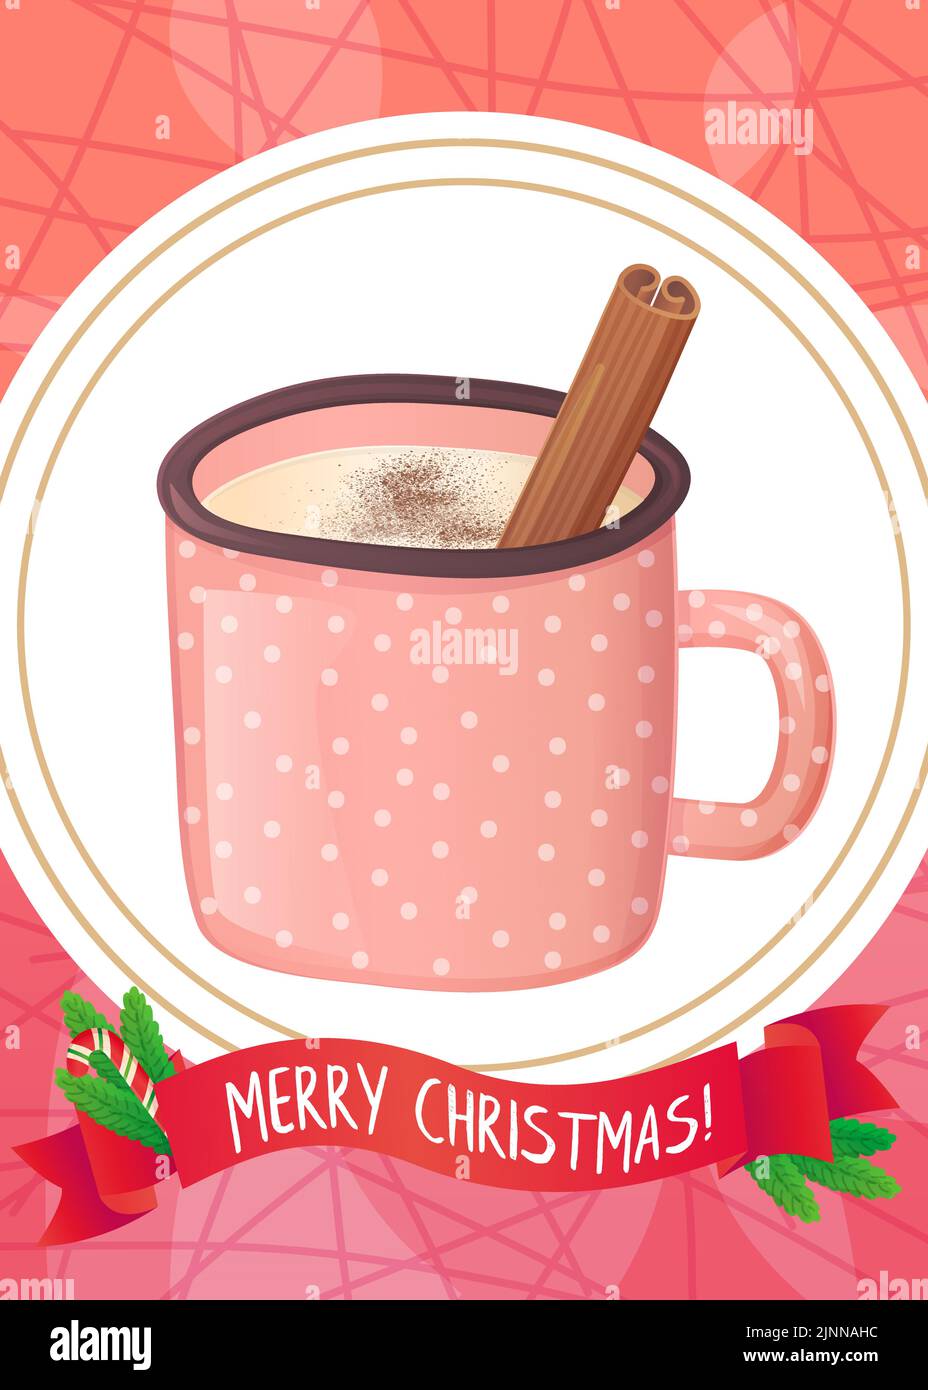 Cute eggnog drink with chocolate powder and cinnamon christmas greeting card Stock Vector